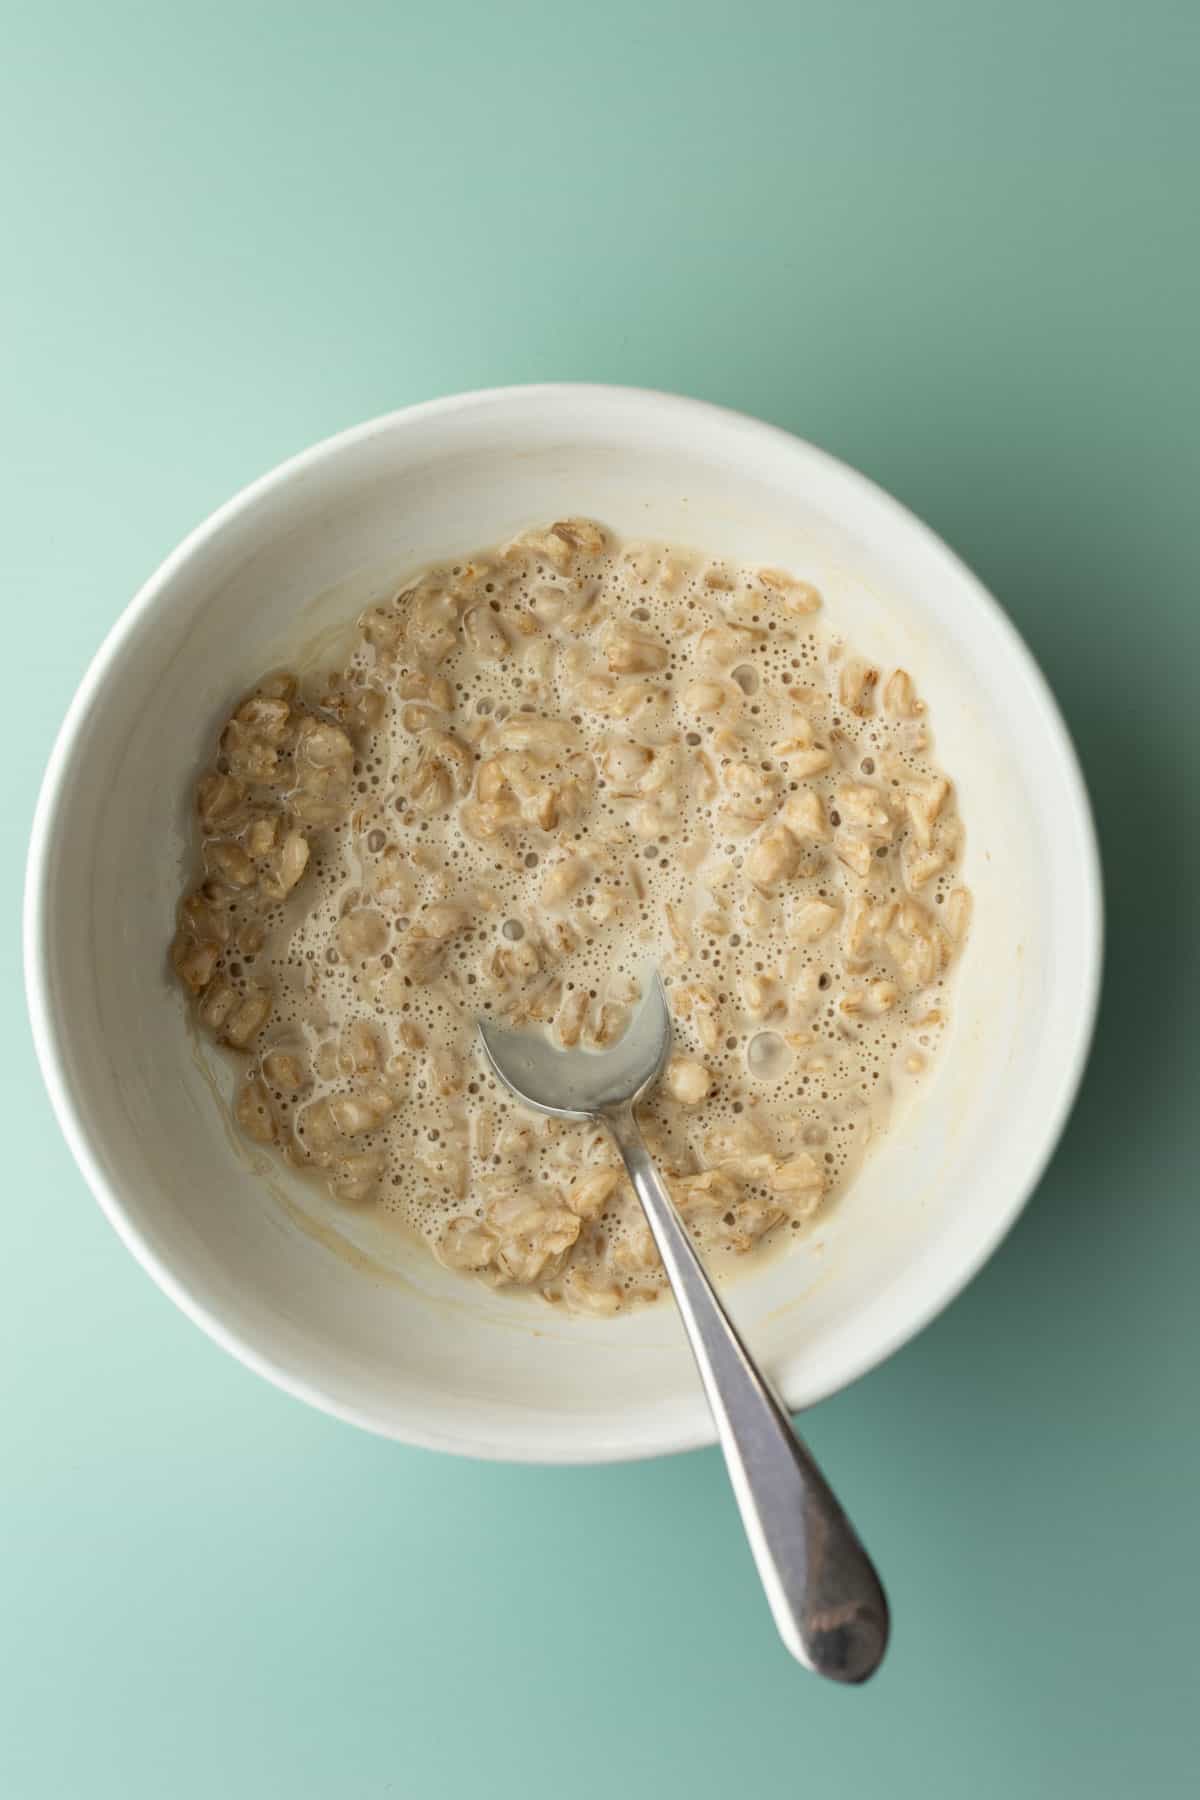 Creamy oatmeal in a white bowl, set aside to cool.